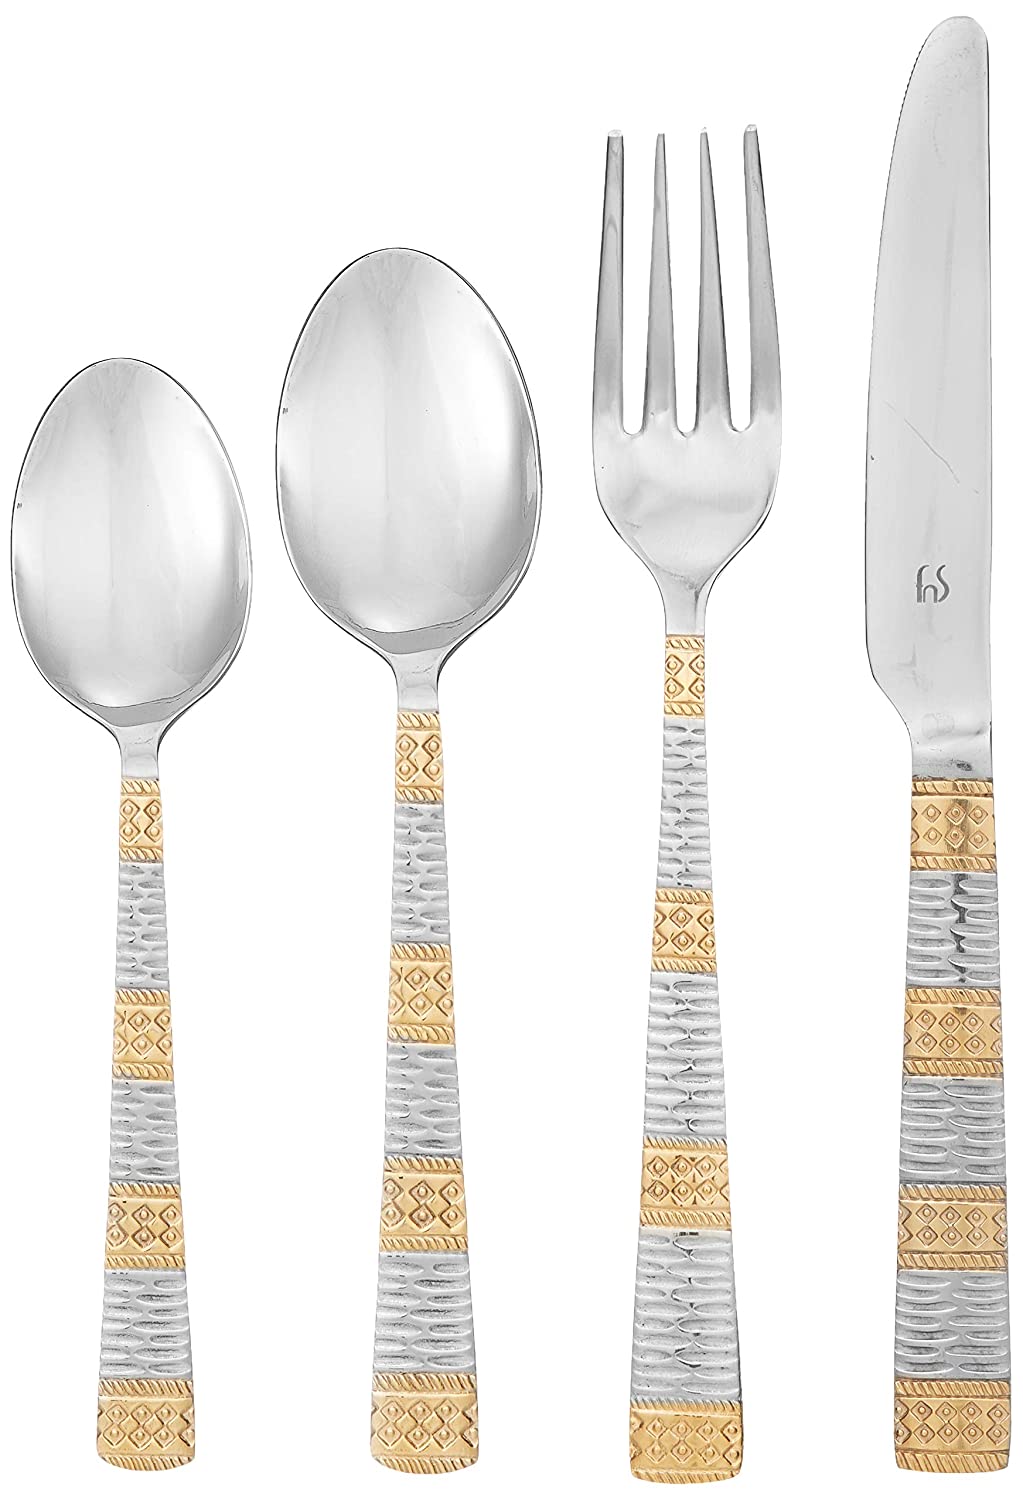 Detec™ FnS Stainless Steel Dorian Cutlery Set with Baby Spoon, 24-Piece, Silver